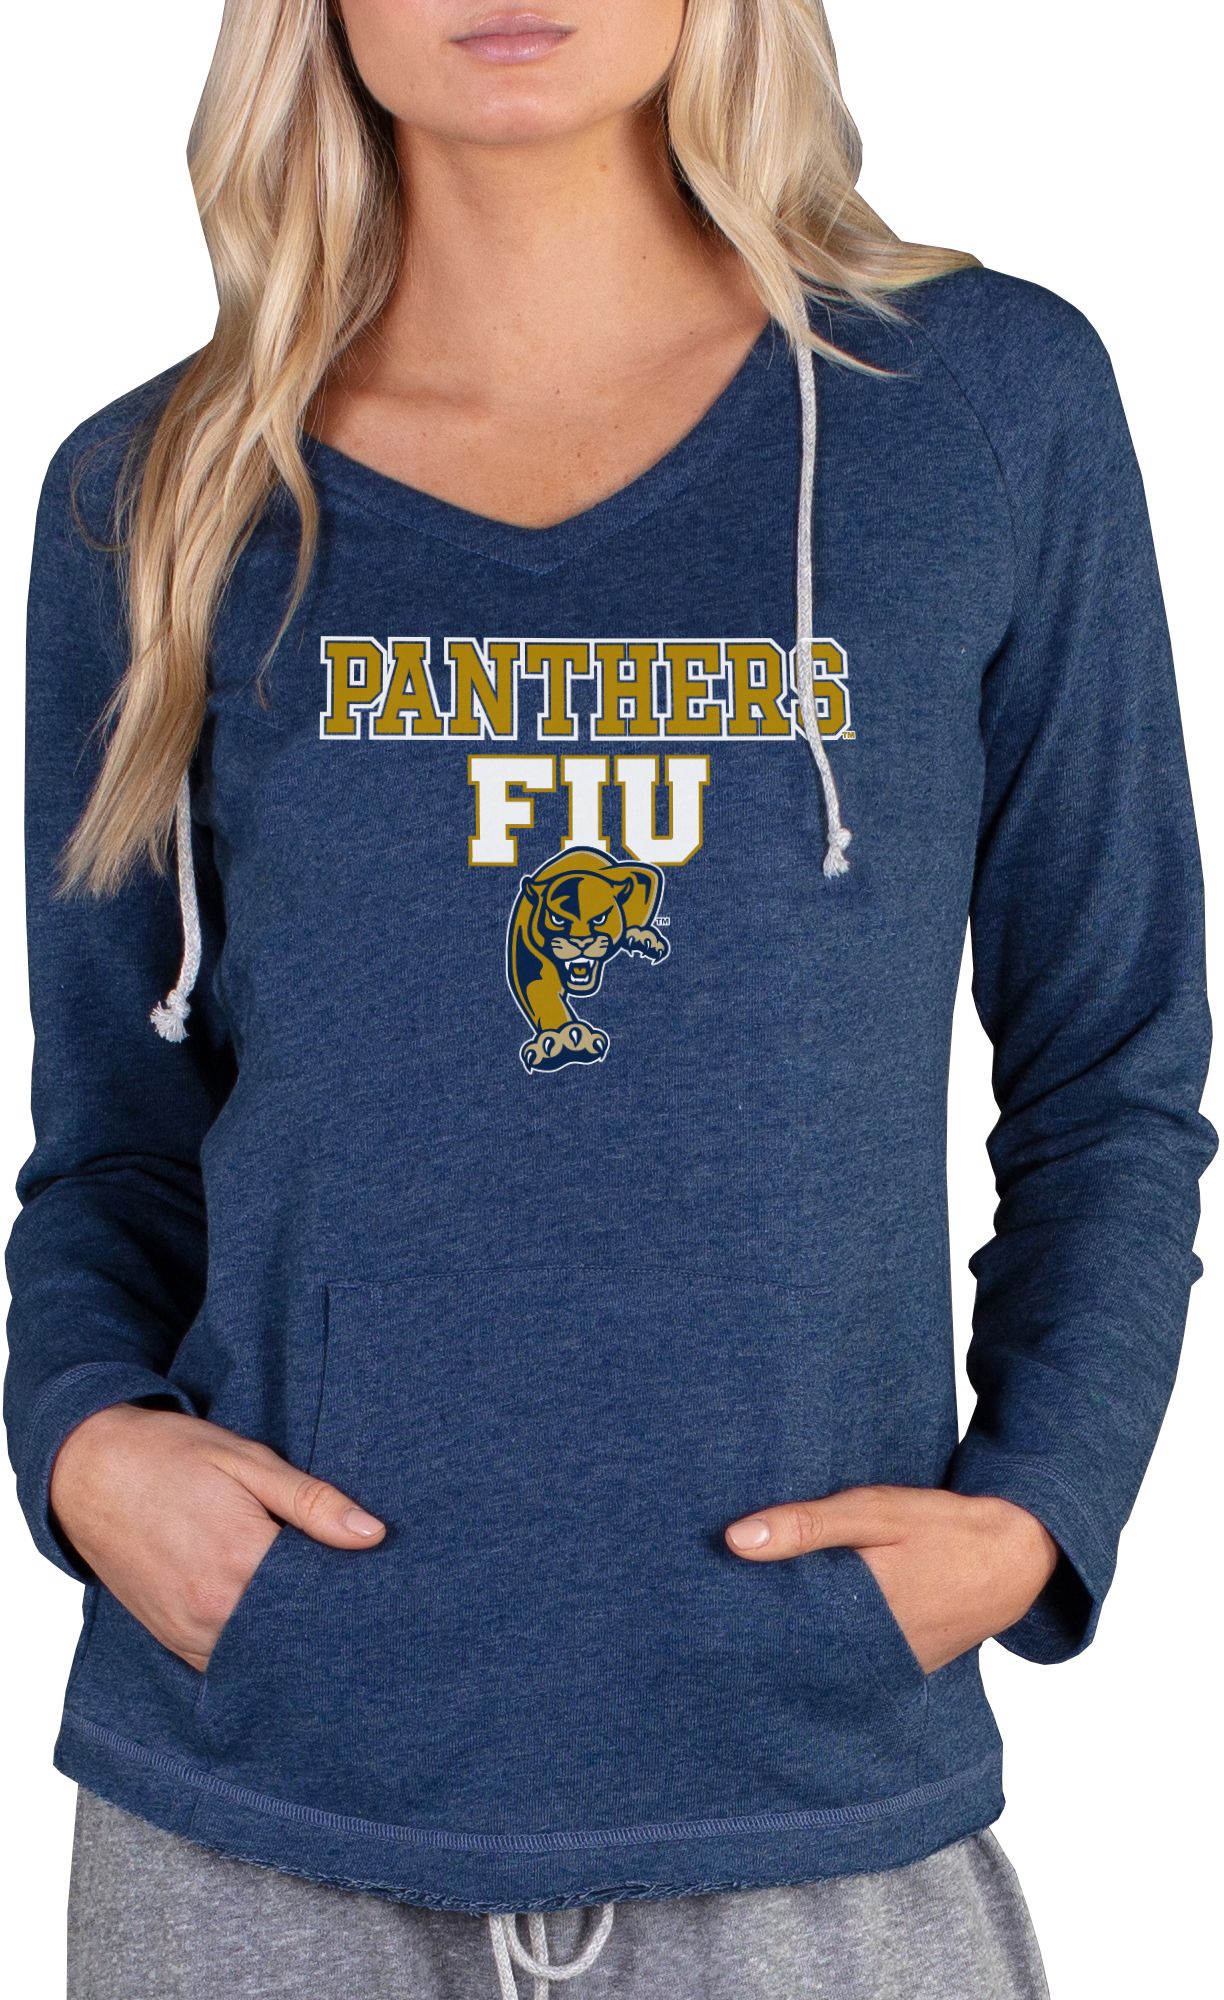 Panthers women's apparel